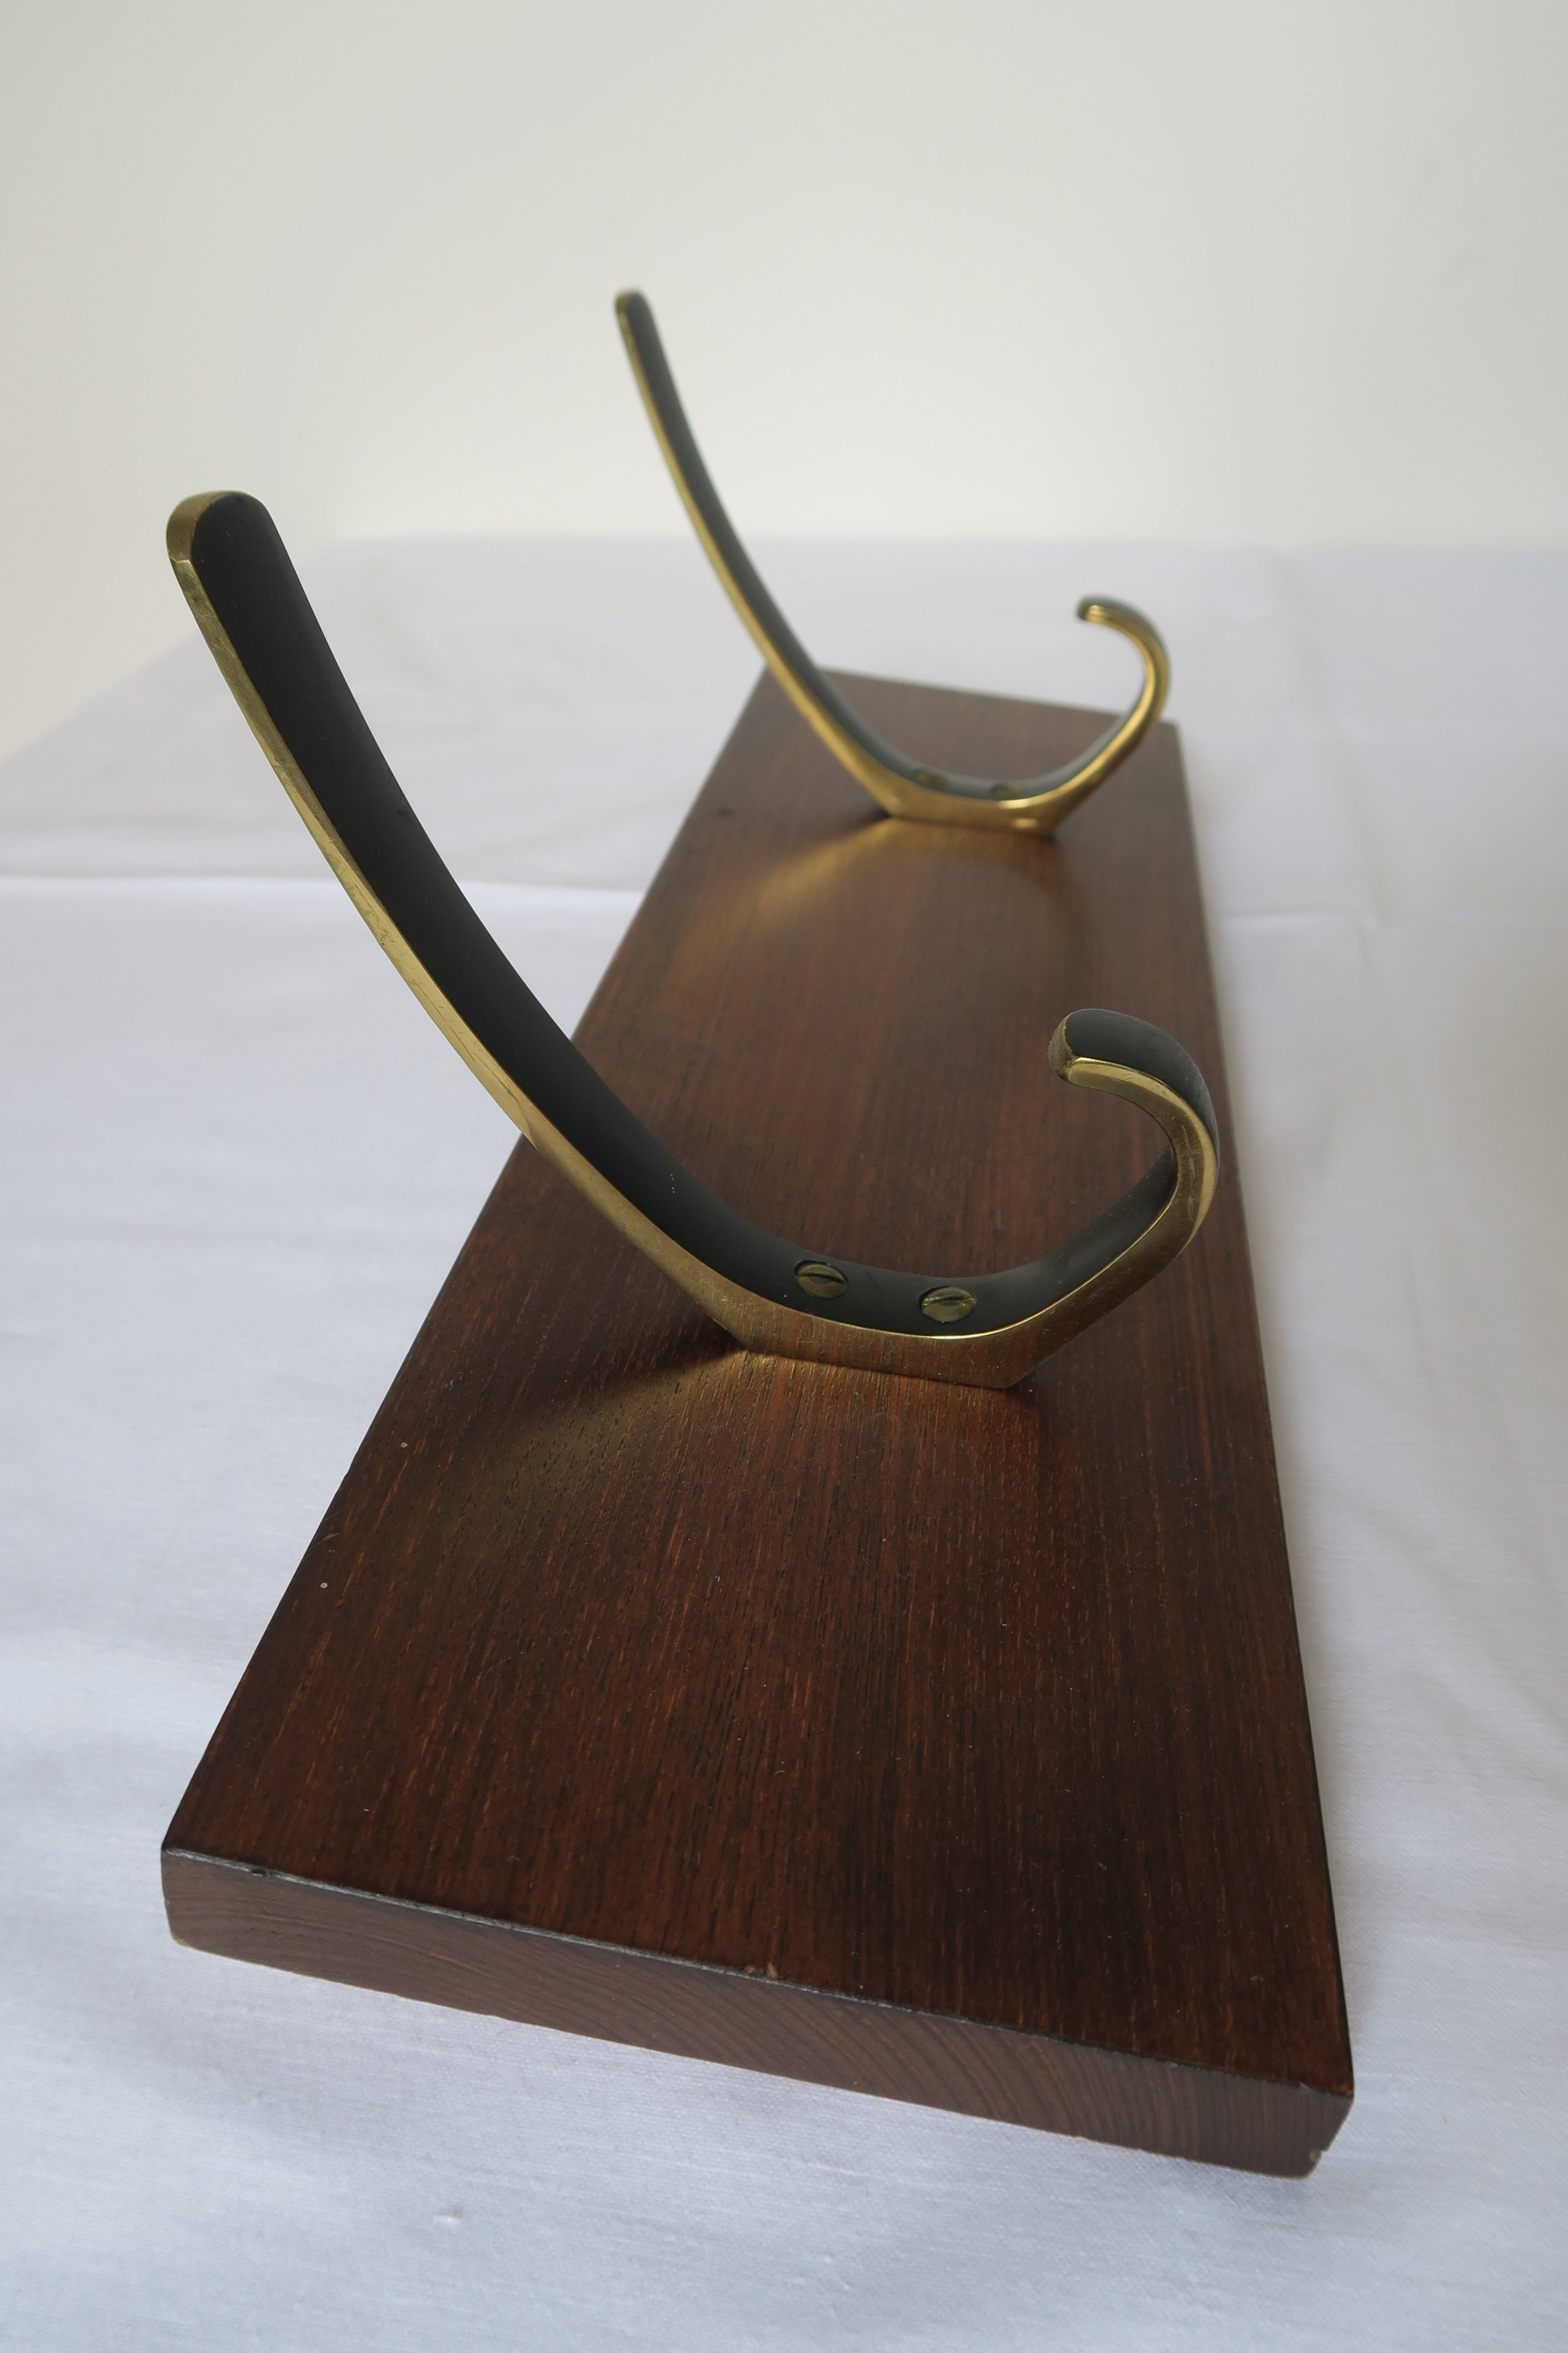 This coat rack is an authentic piece designed and crafted by the Austrian Werkstätten Of Herta Baller, probably designed by Walter Bosse. It was made using the finest materials, in this case beautiful medium-dark wood and brass hooks and screws. The